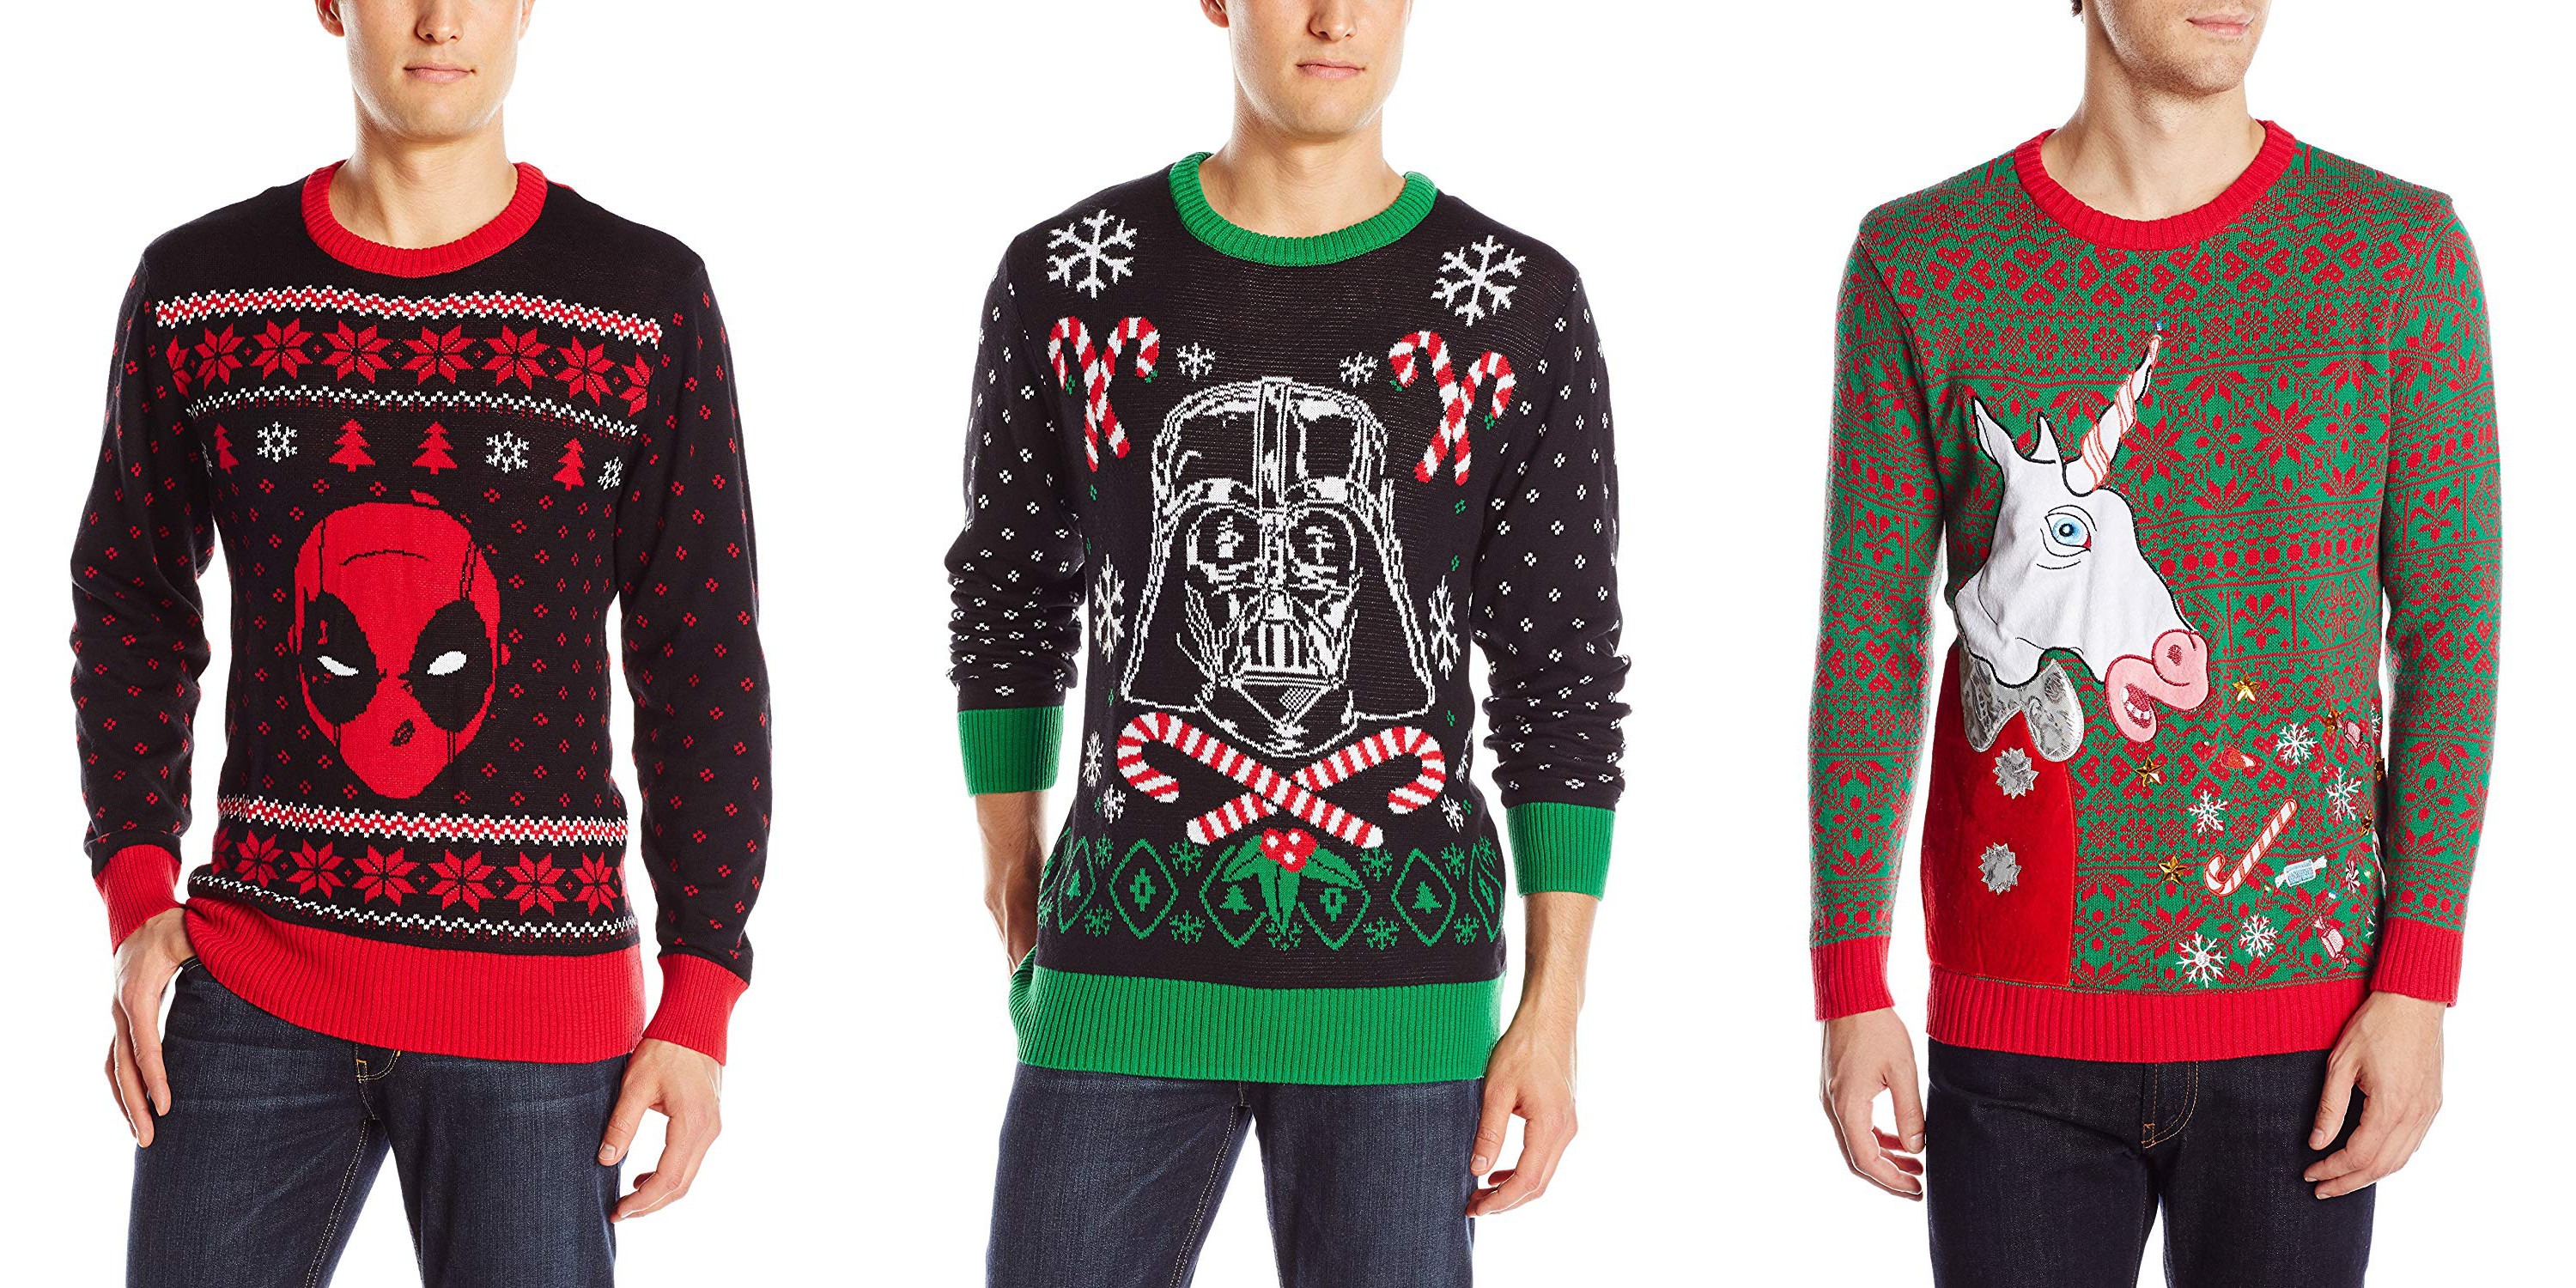 Ugly Christmas Sweaters from 7 at Amazon today Star Wars